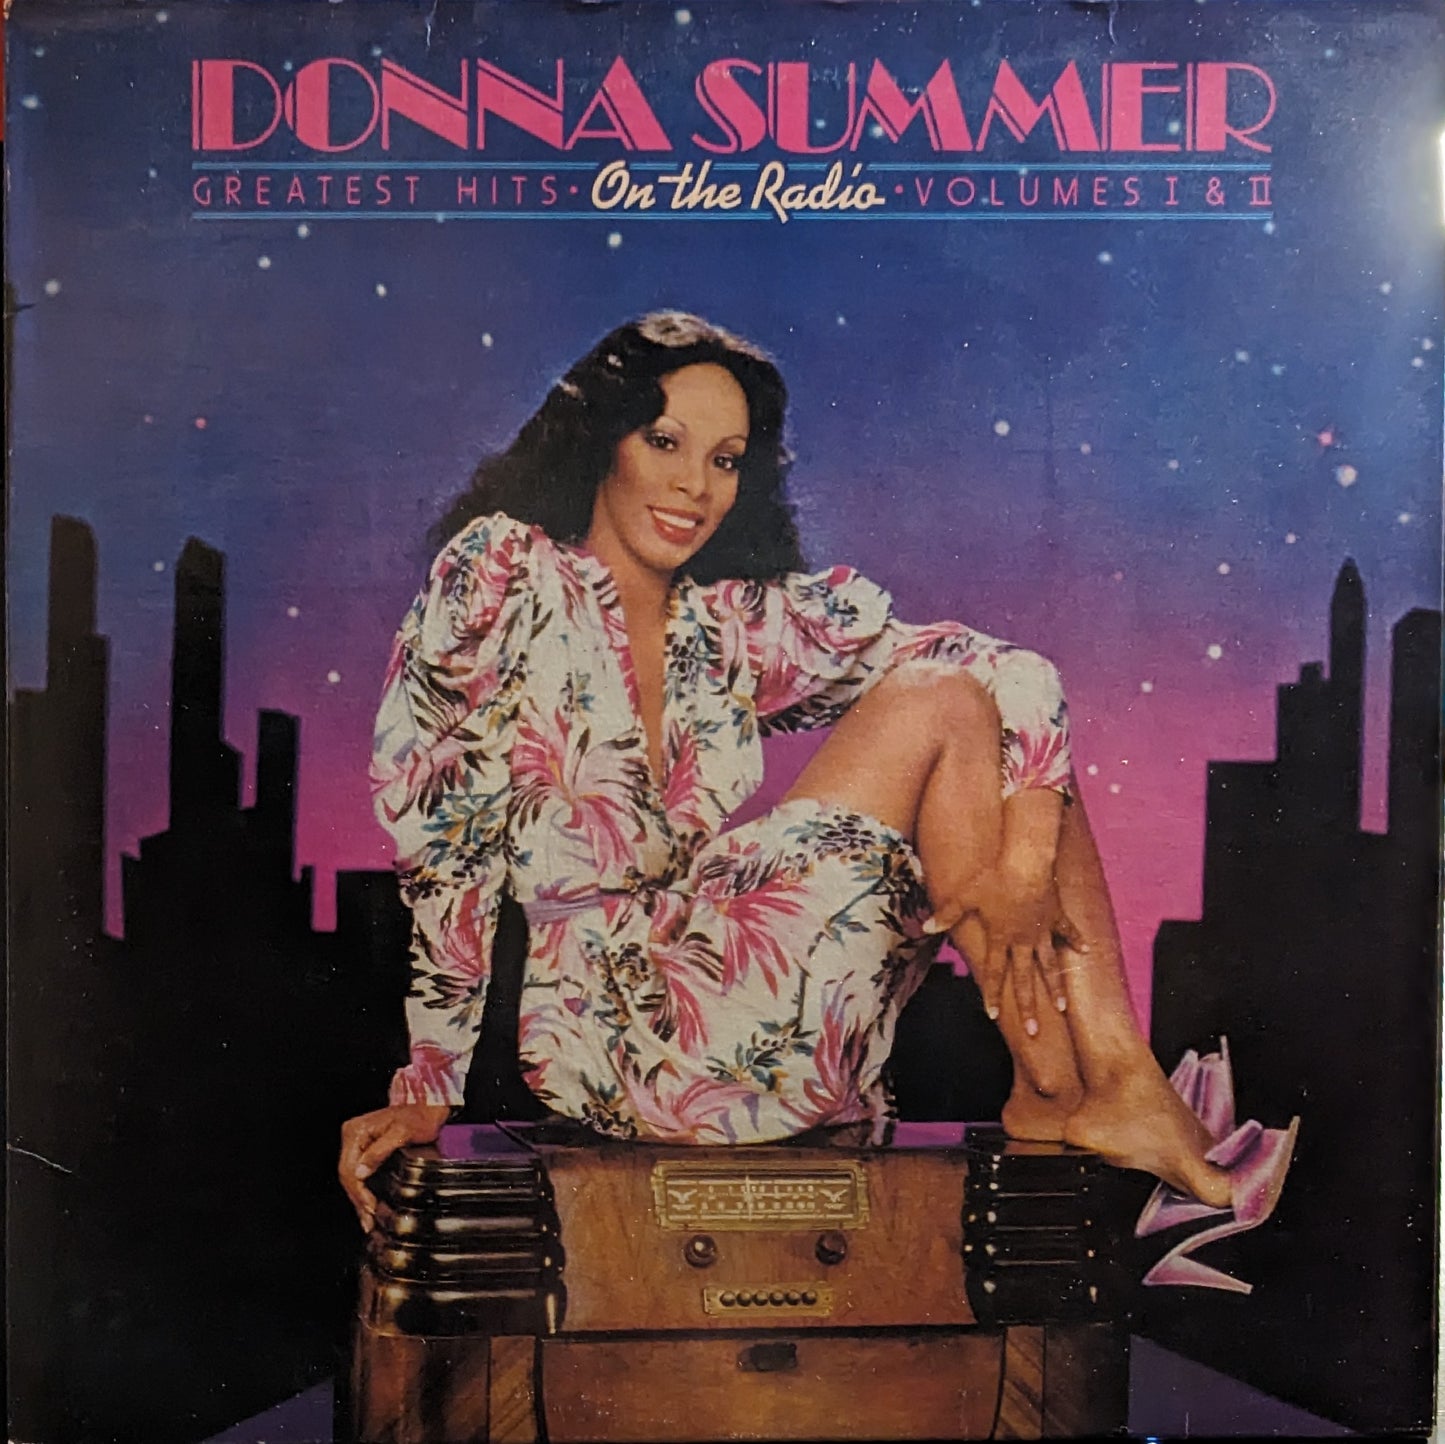 Donna Summer On The Radio: Greatest Hits Vol. 1 & 2 *KEEL / 53* 2xLP Near Mint (NM or M-) Excellent (EX)